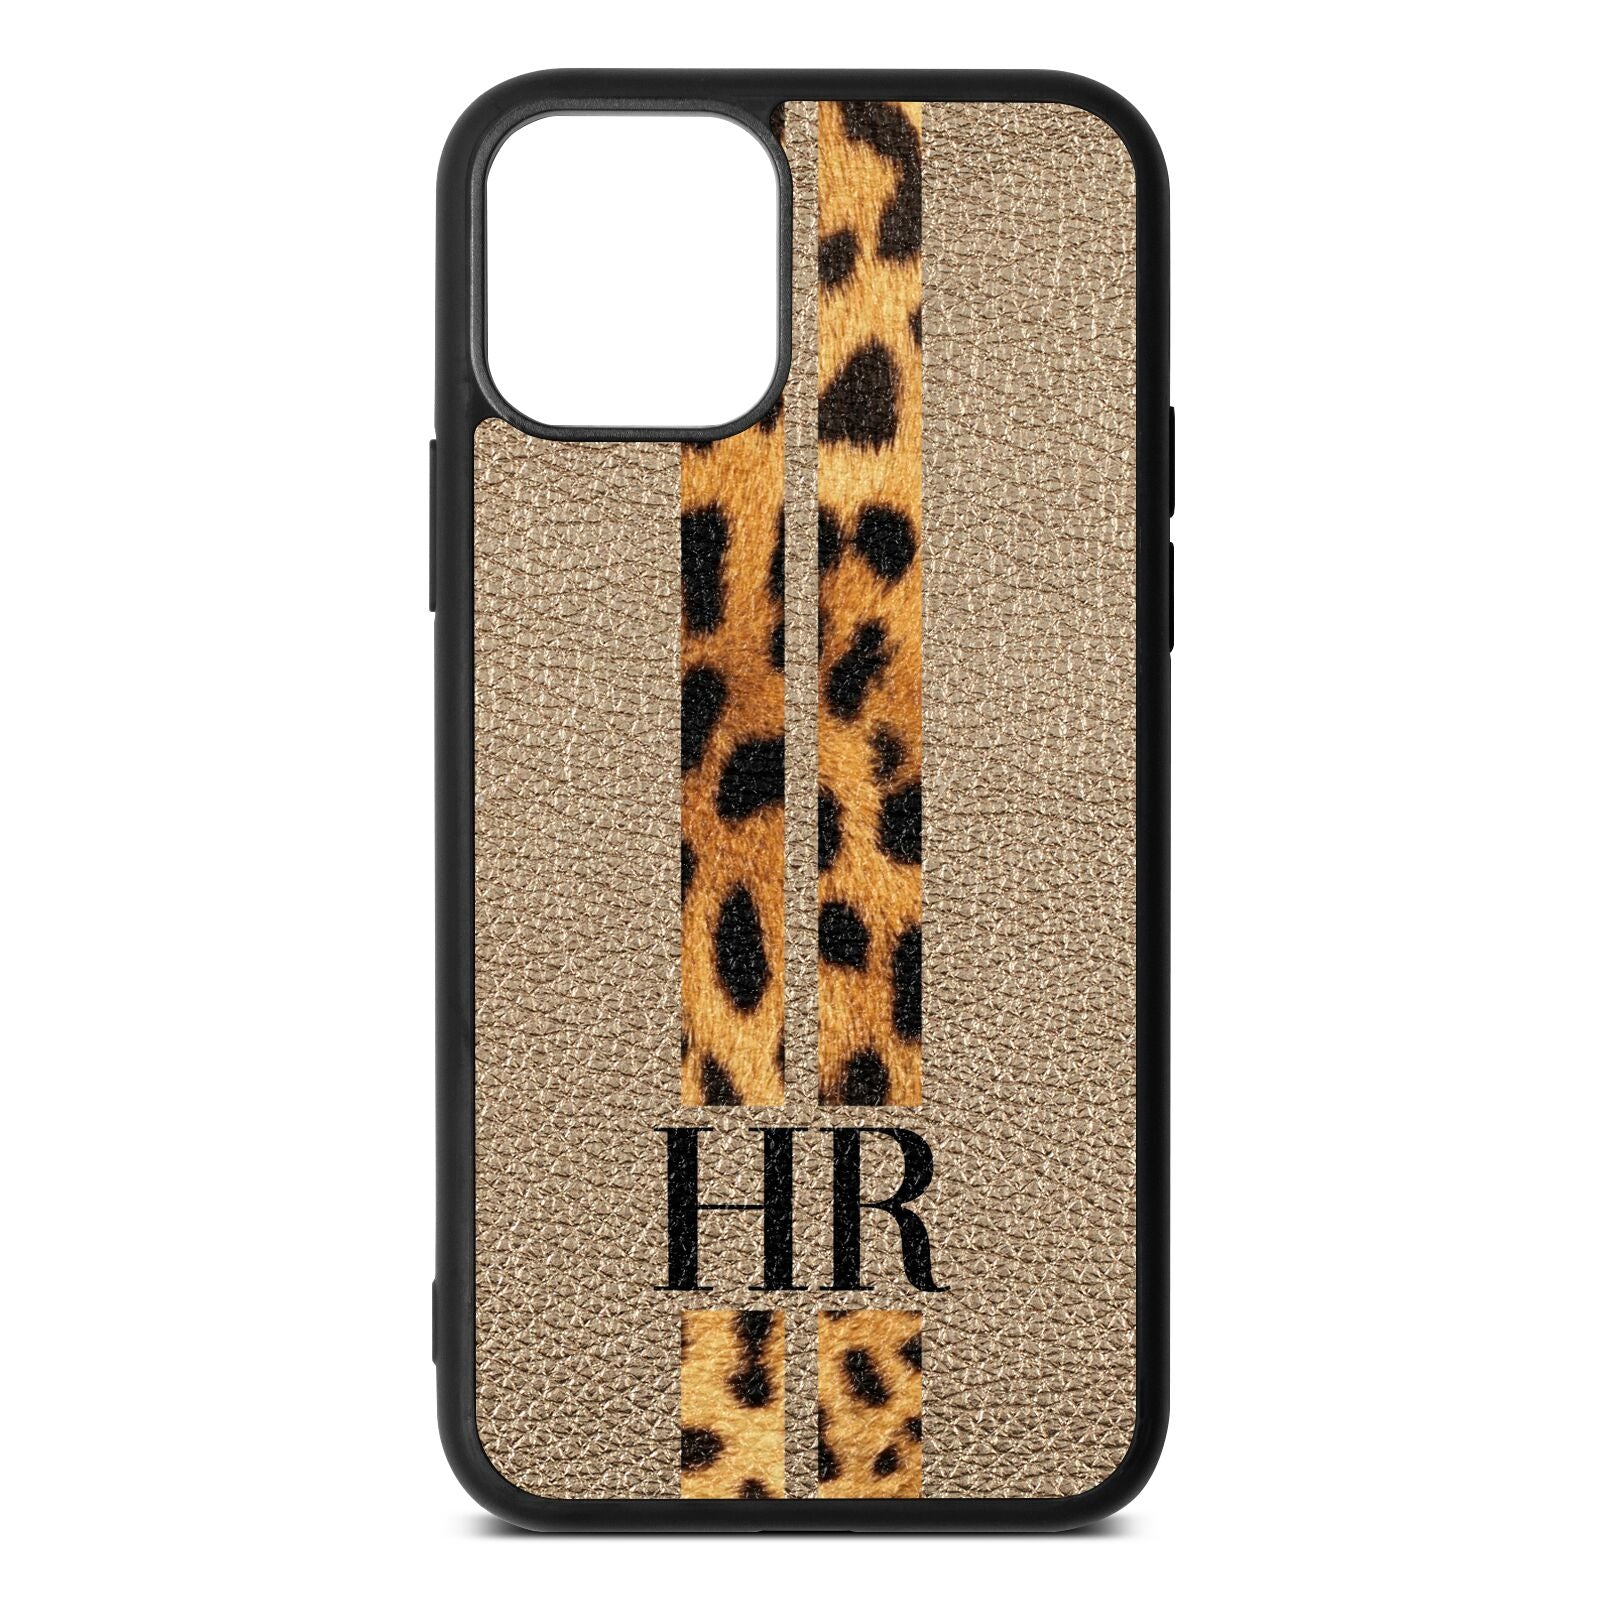 Initialled Leopard Print Stripes Gold Pebble Leather iPhone 11 Pro Case